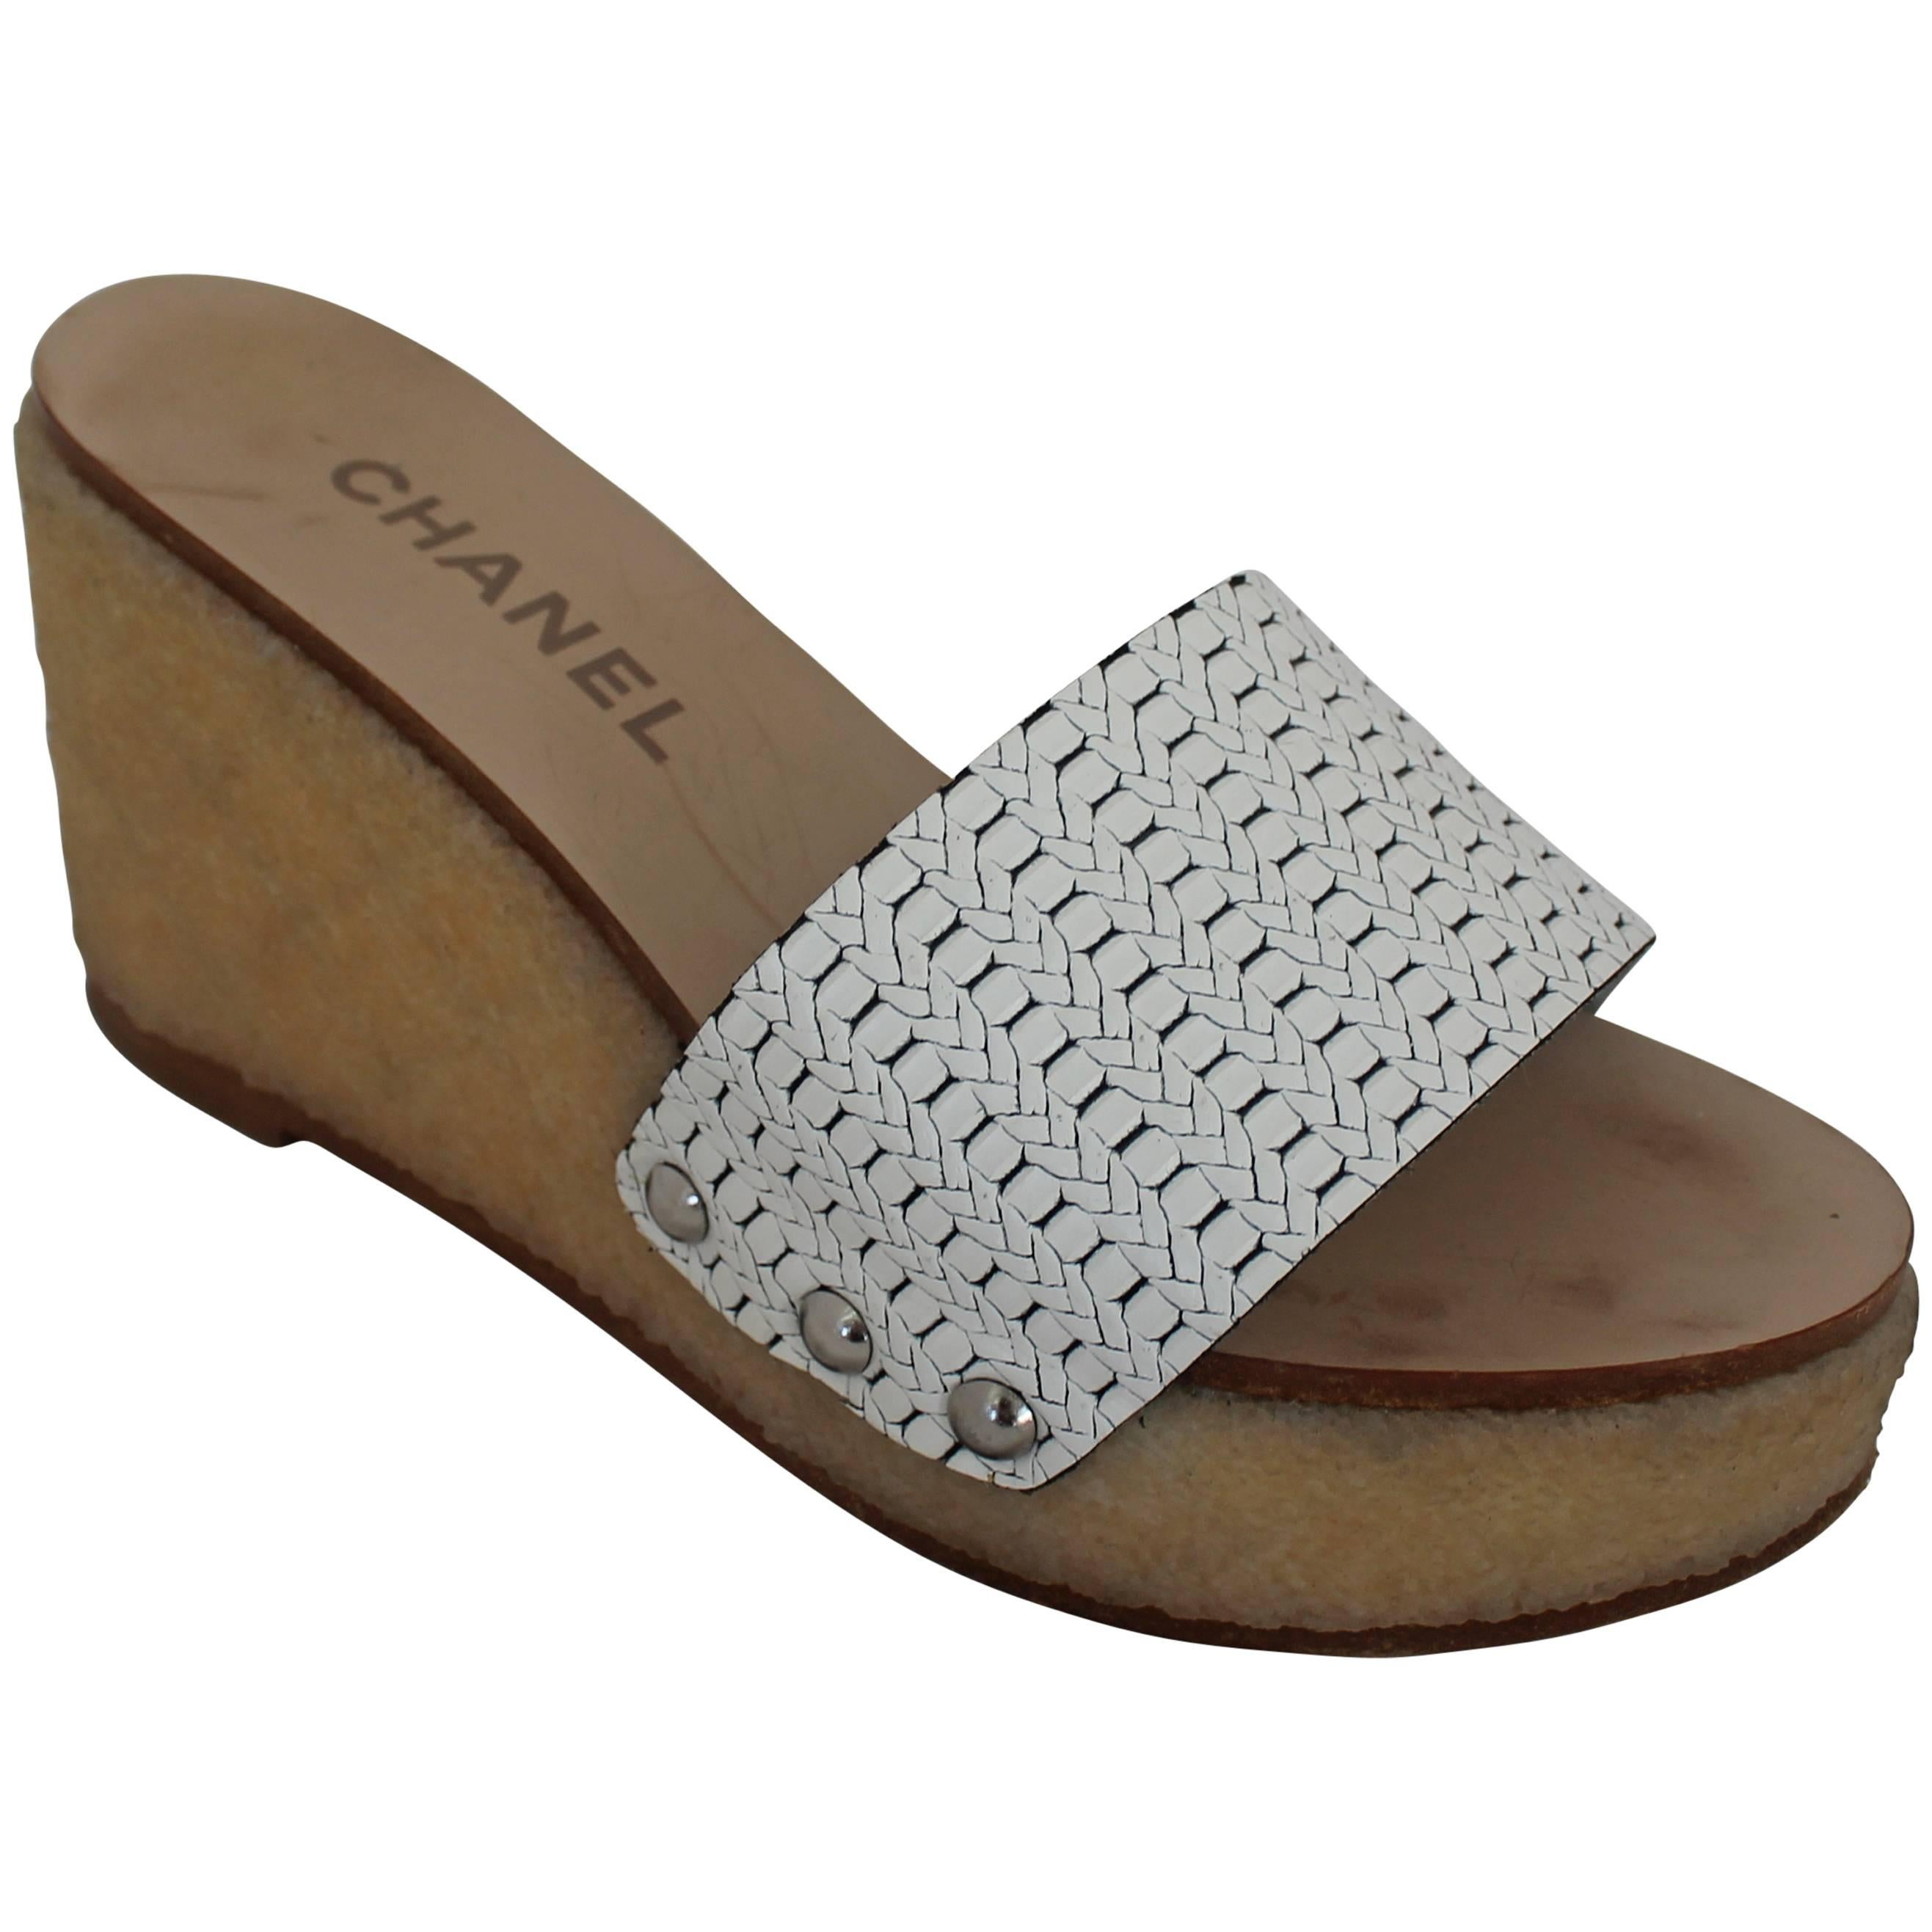 Chanel White Plastic Wedges with Tan Textured Rubber - 36